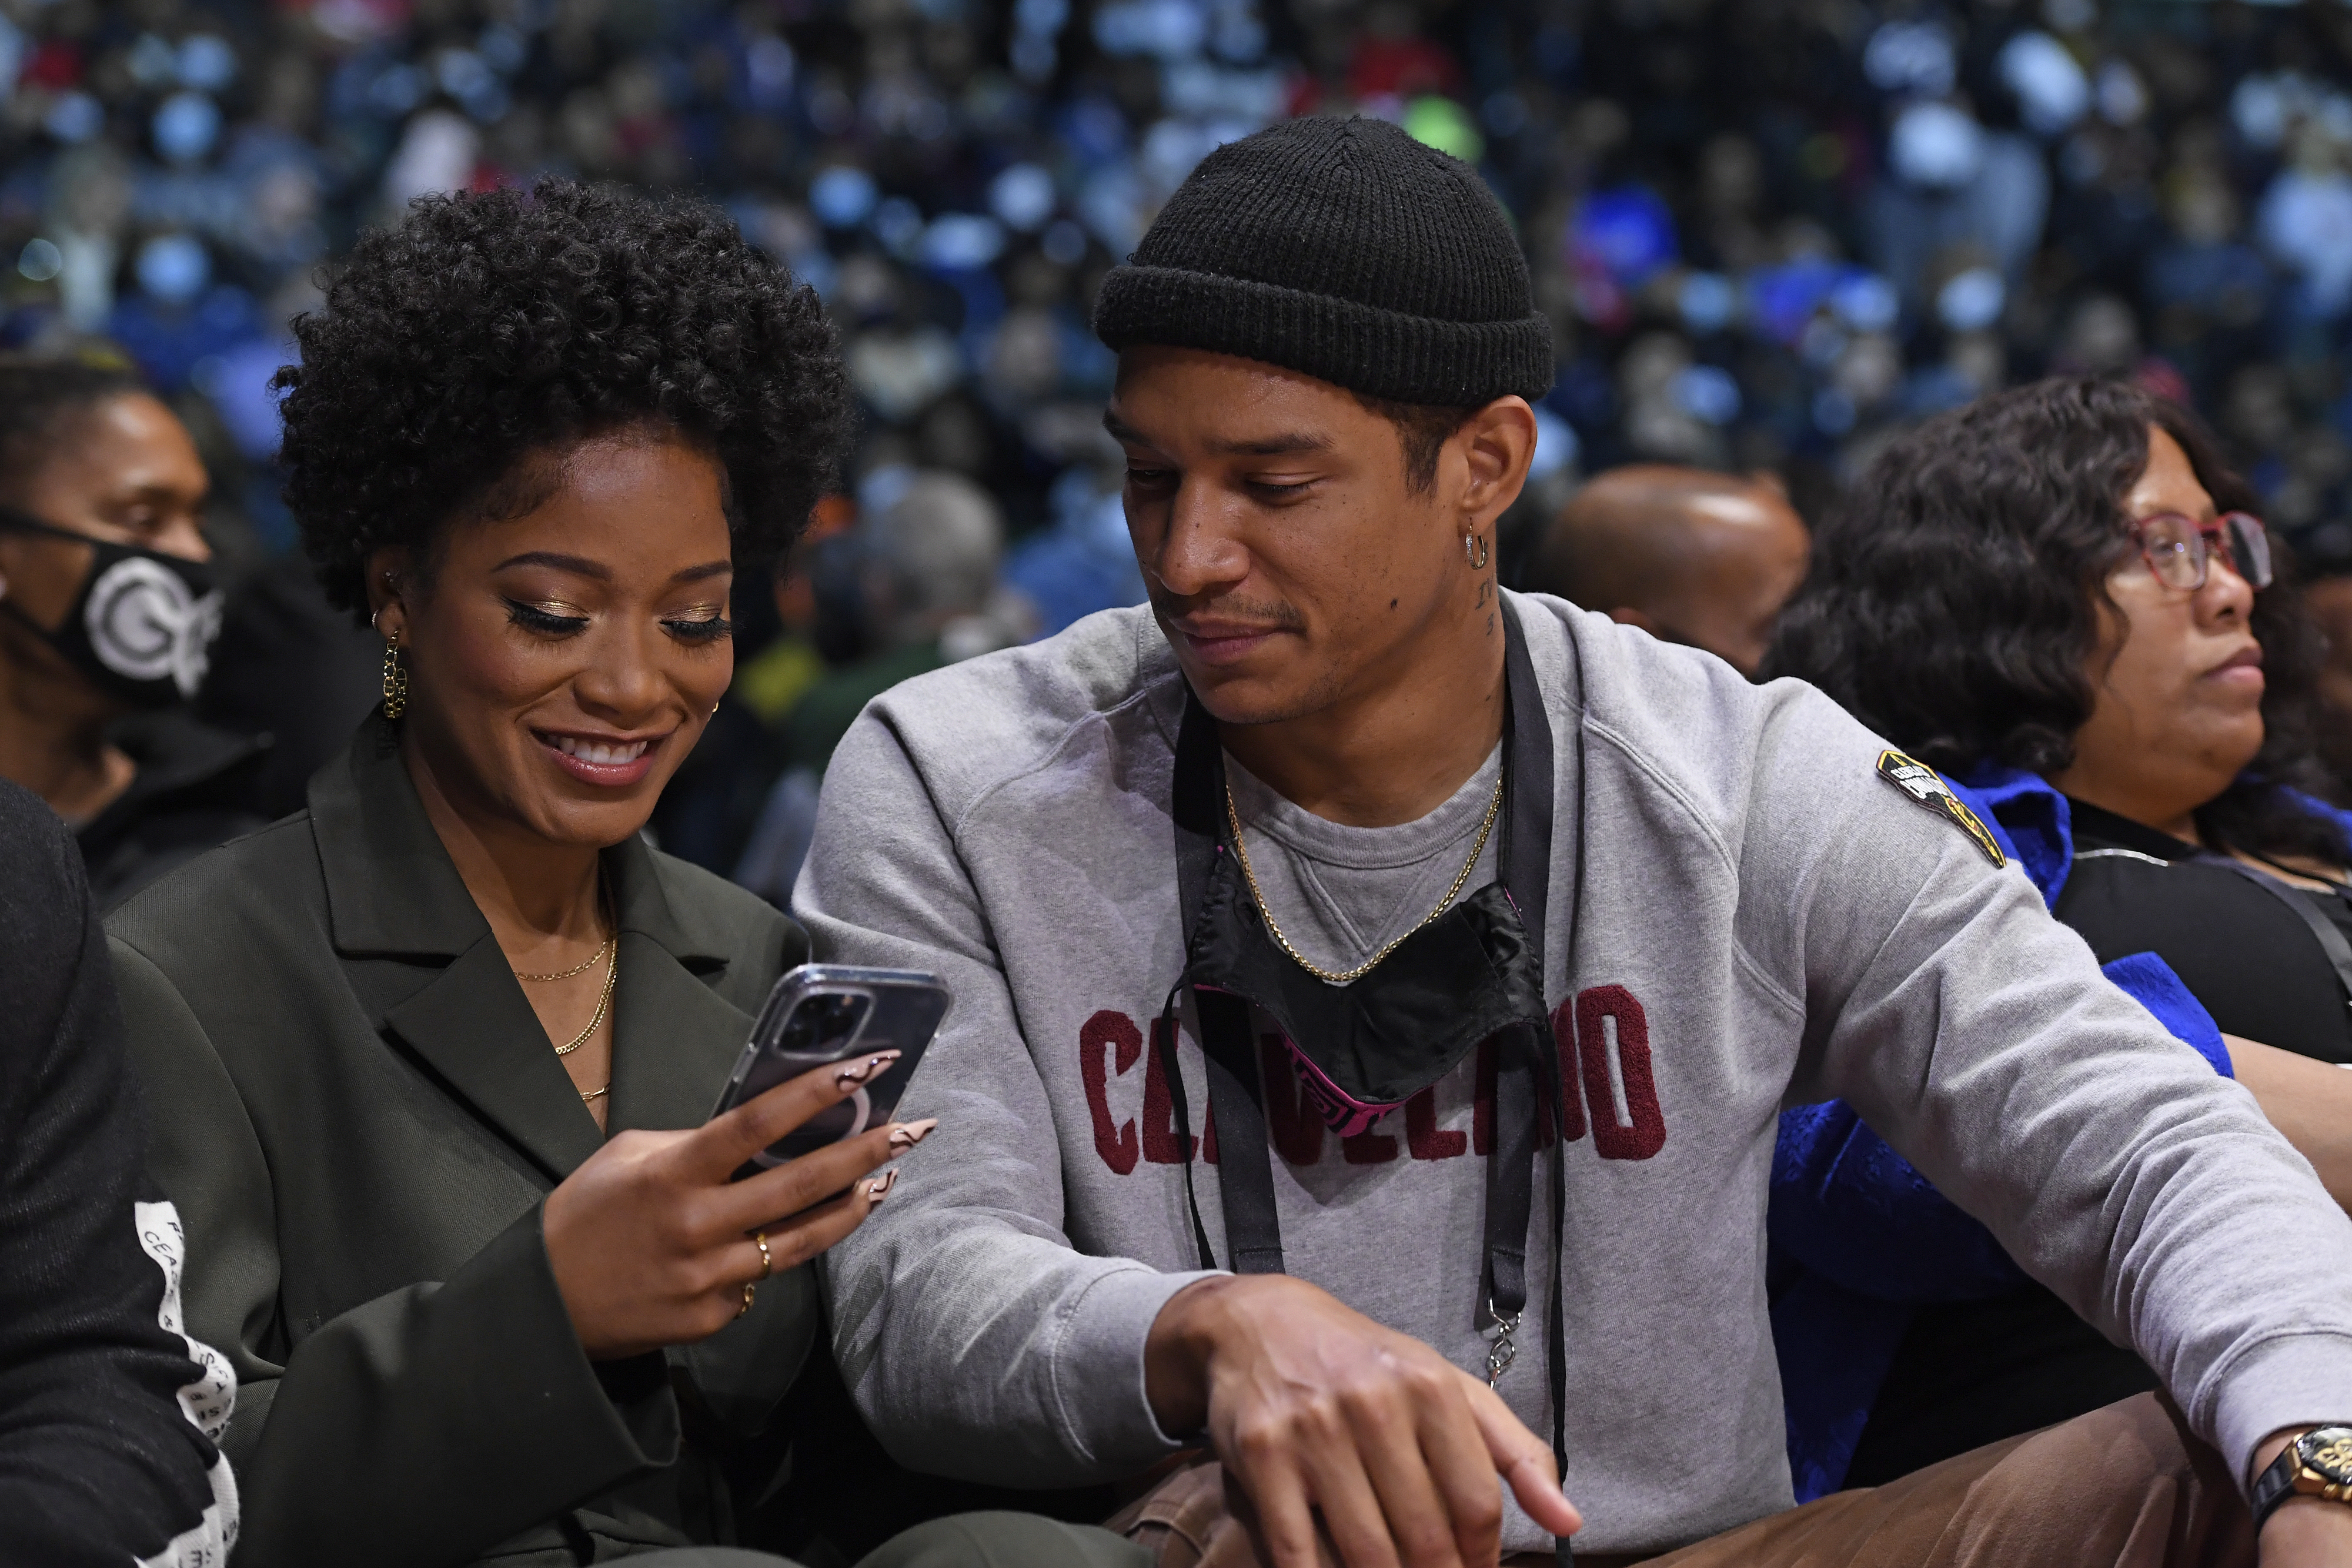 Keke smiling at her phone and Darius peering over as they sit at a game